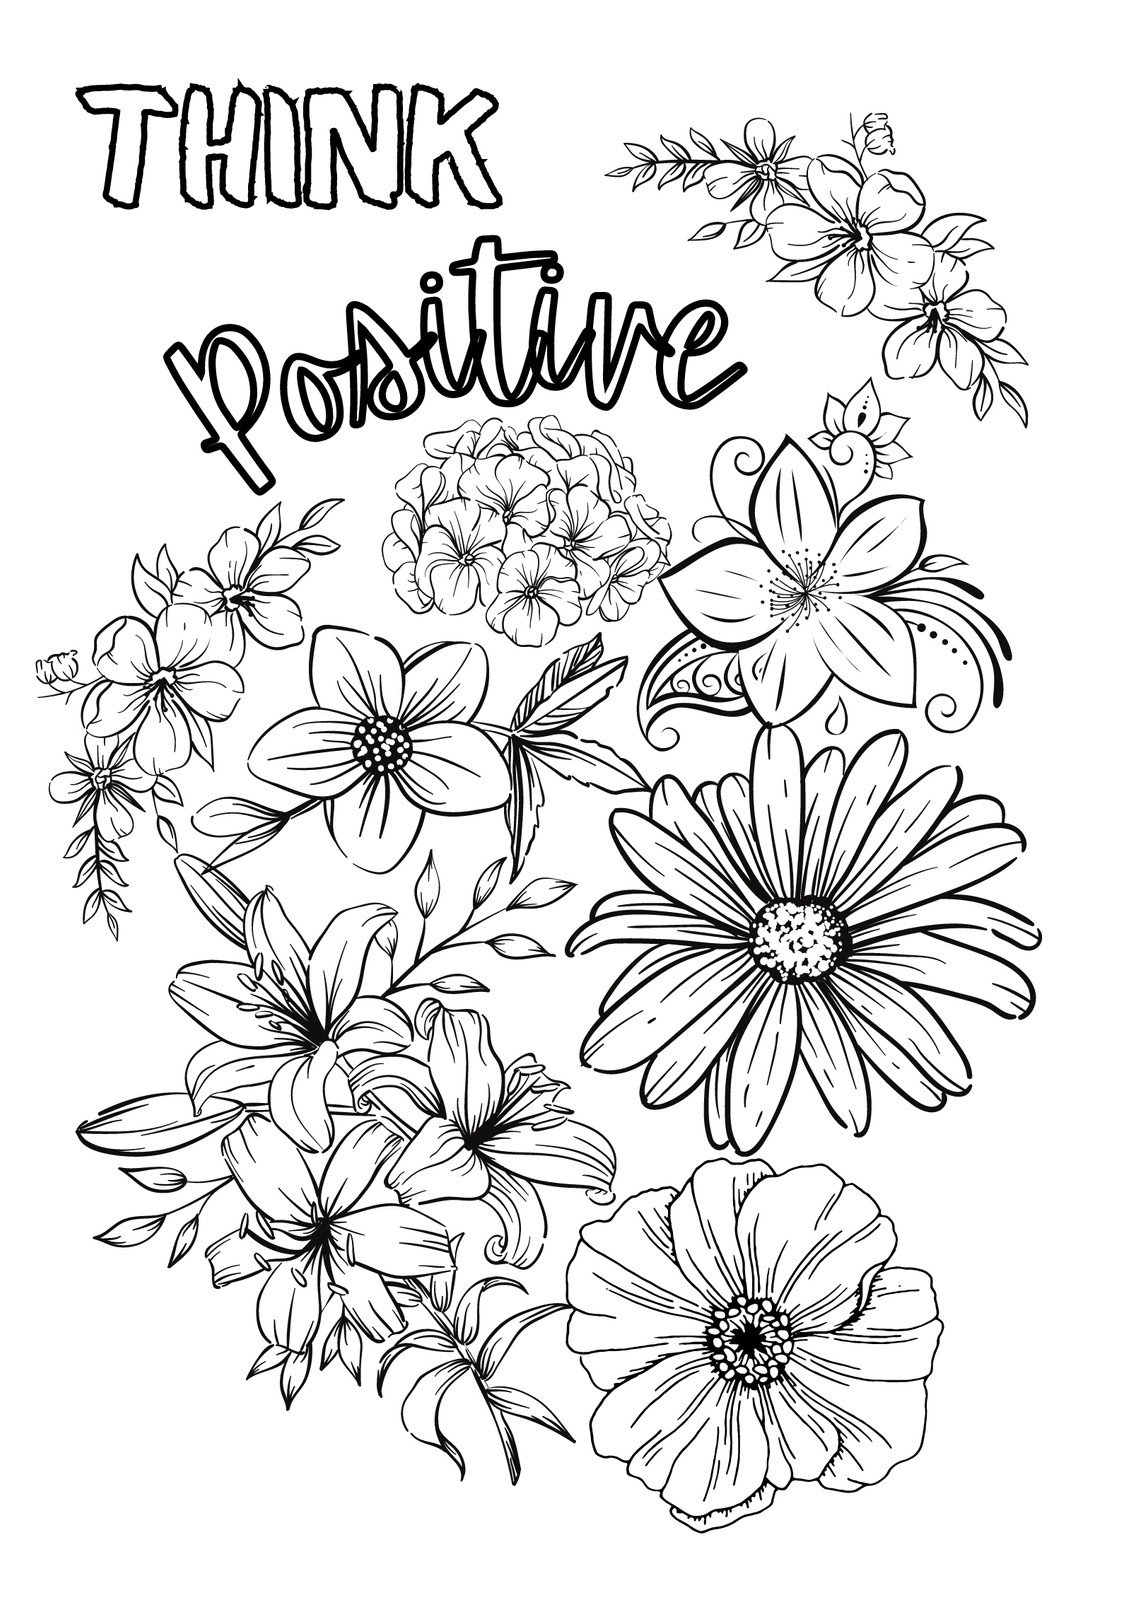 Free Printable Coloring Page Templates To Customize | Canva with Free Coloring Pages Com Printable